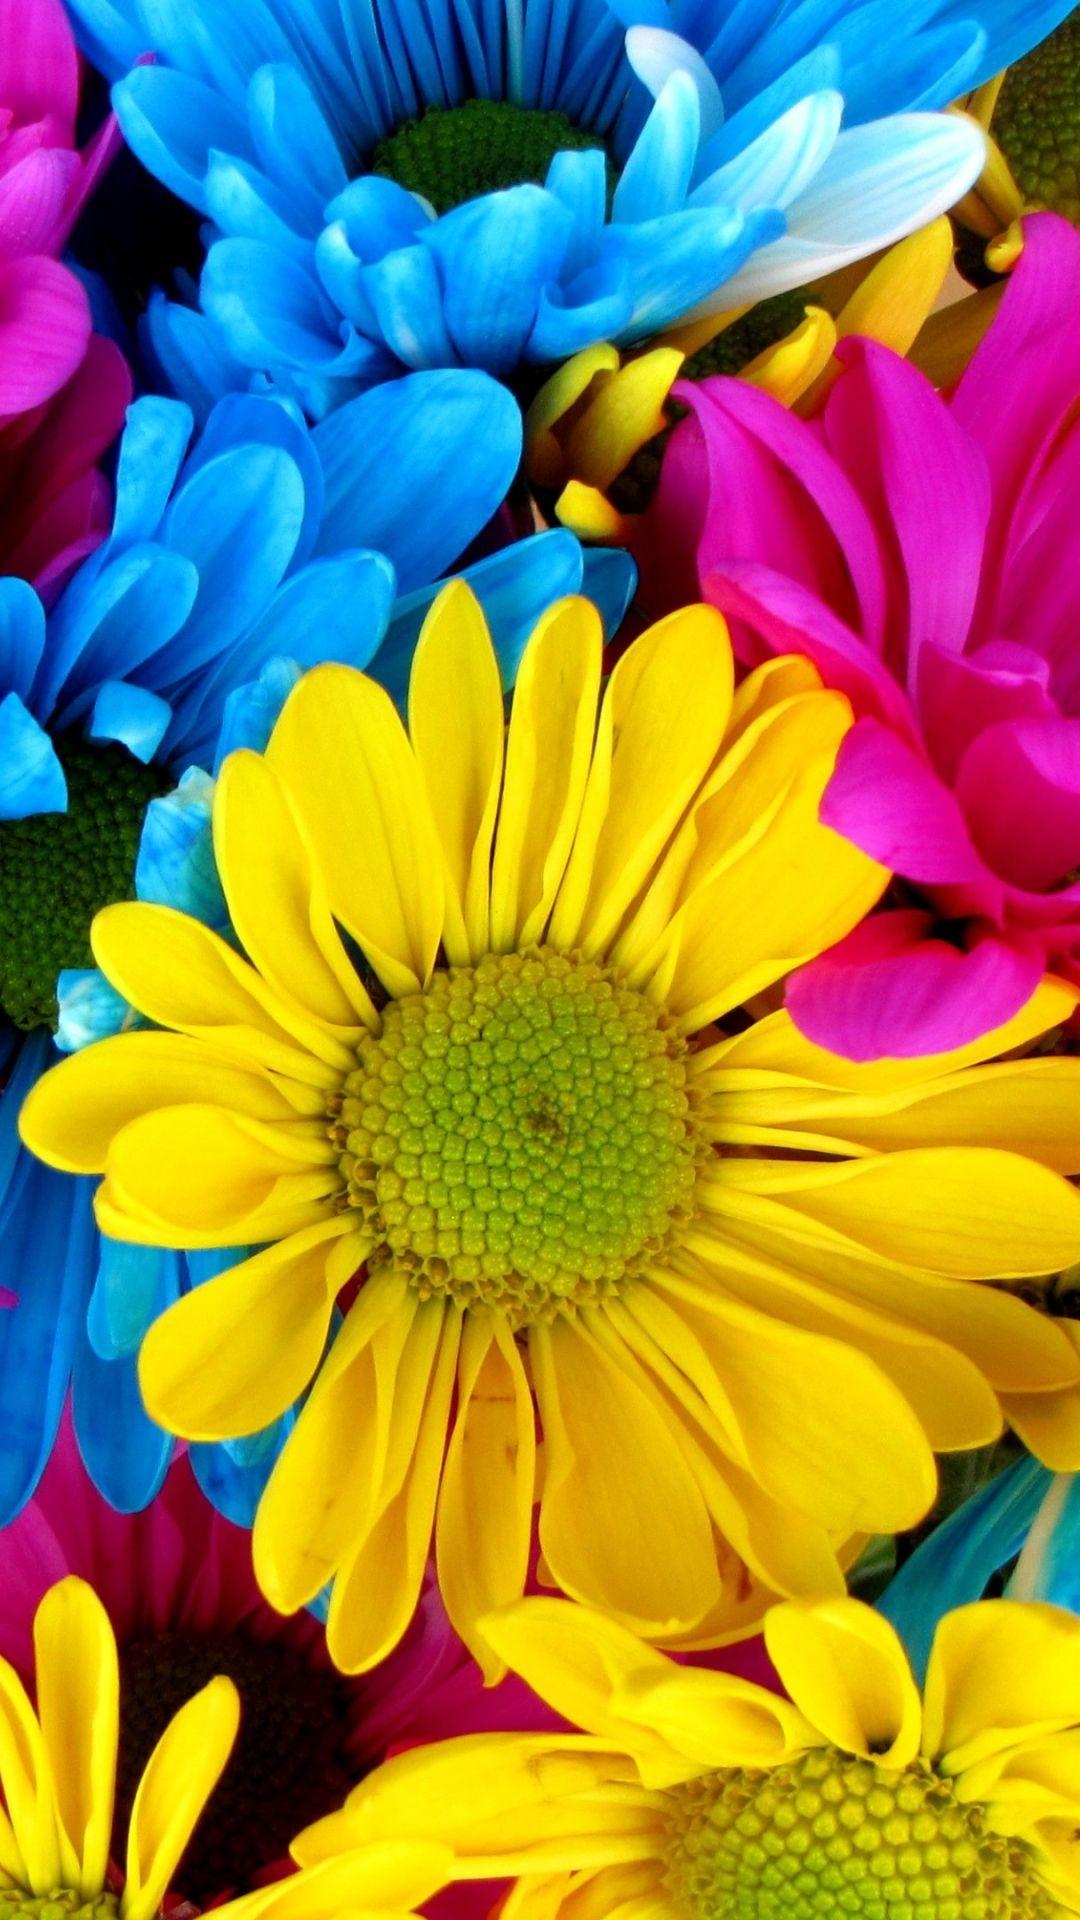 Colorful Daisies Wallpapers - Top Free Colorful Daisies Backgrounds ...